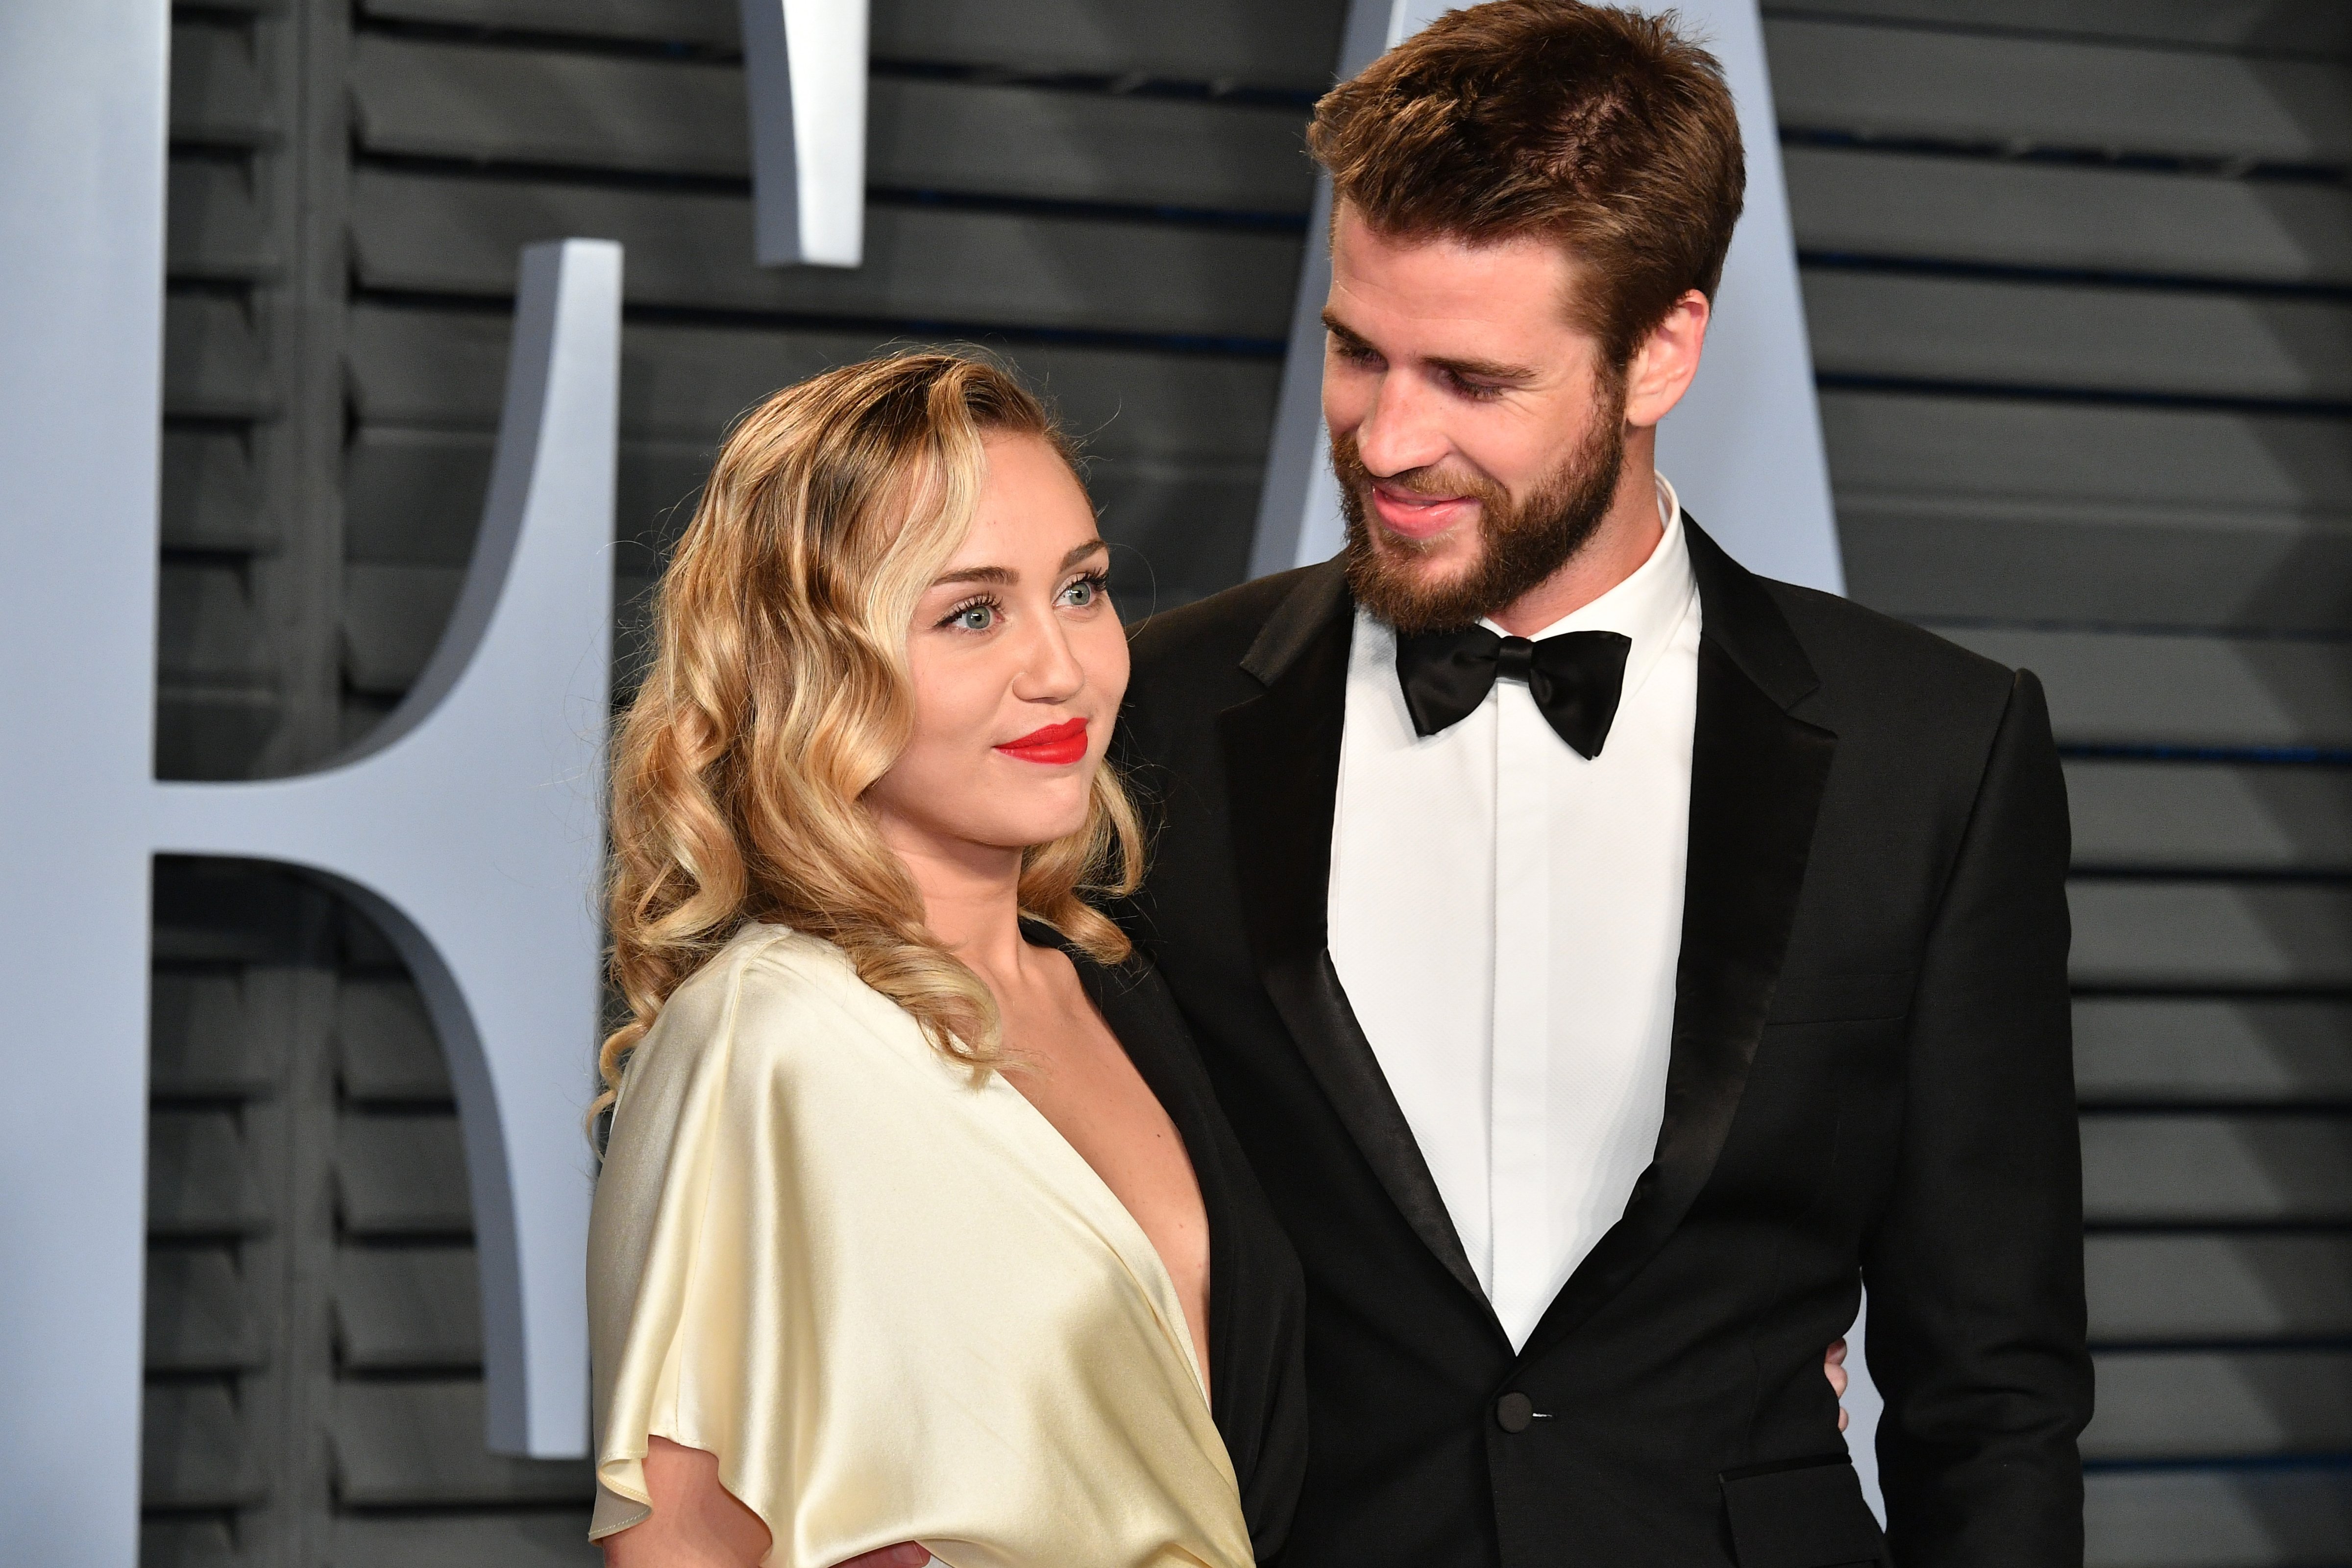 Miley Cyrus (L) and Liam Hemsworth attend the 2018 Vanity Fair Oscar Party hosted by Radhika Jones at Wallis Annenberg Center for the Performing Arts on March 4, 2018 in Beverly Hills, California. (Dia Dipasupil&mdash;Getty Images)